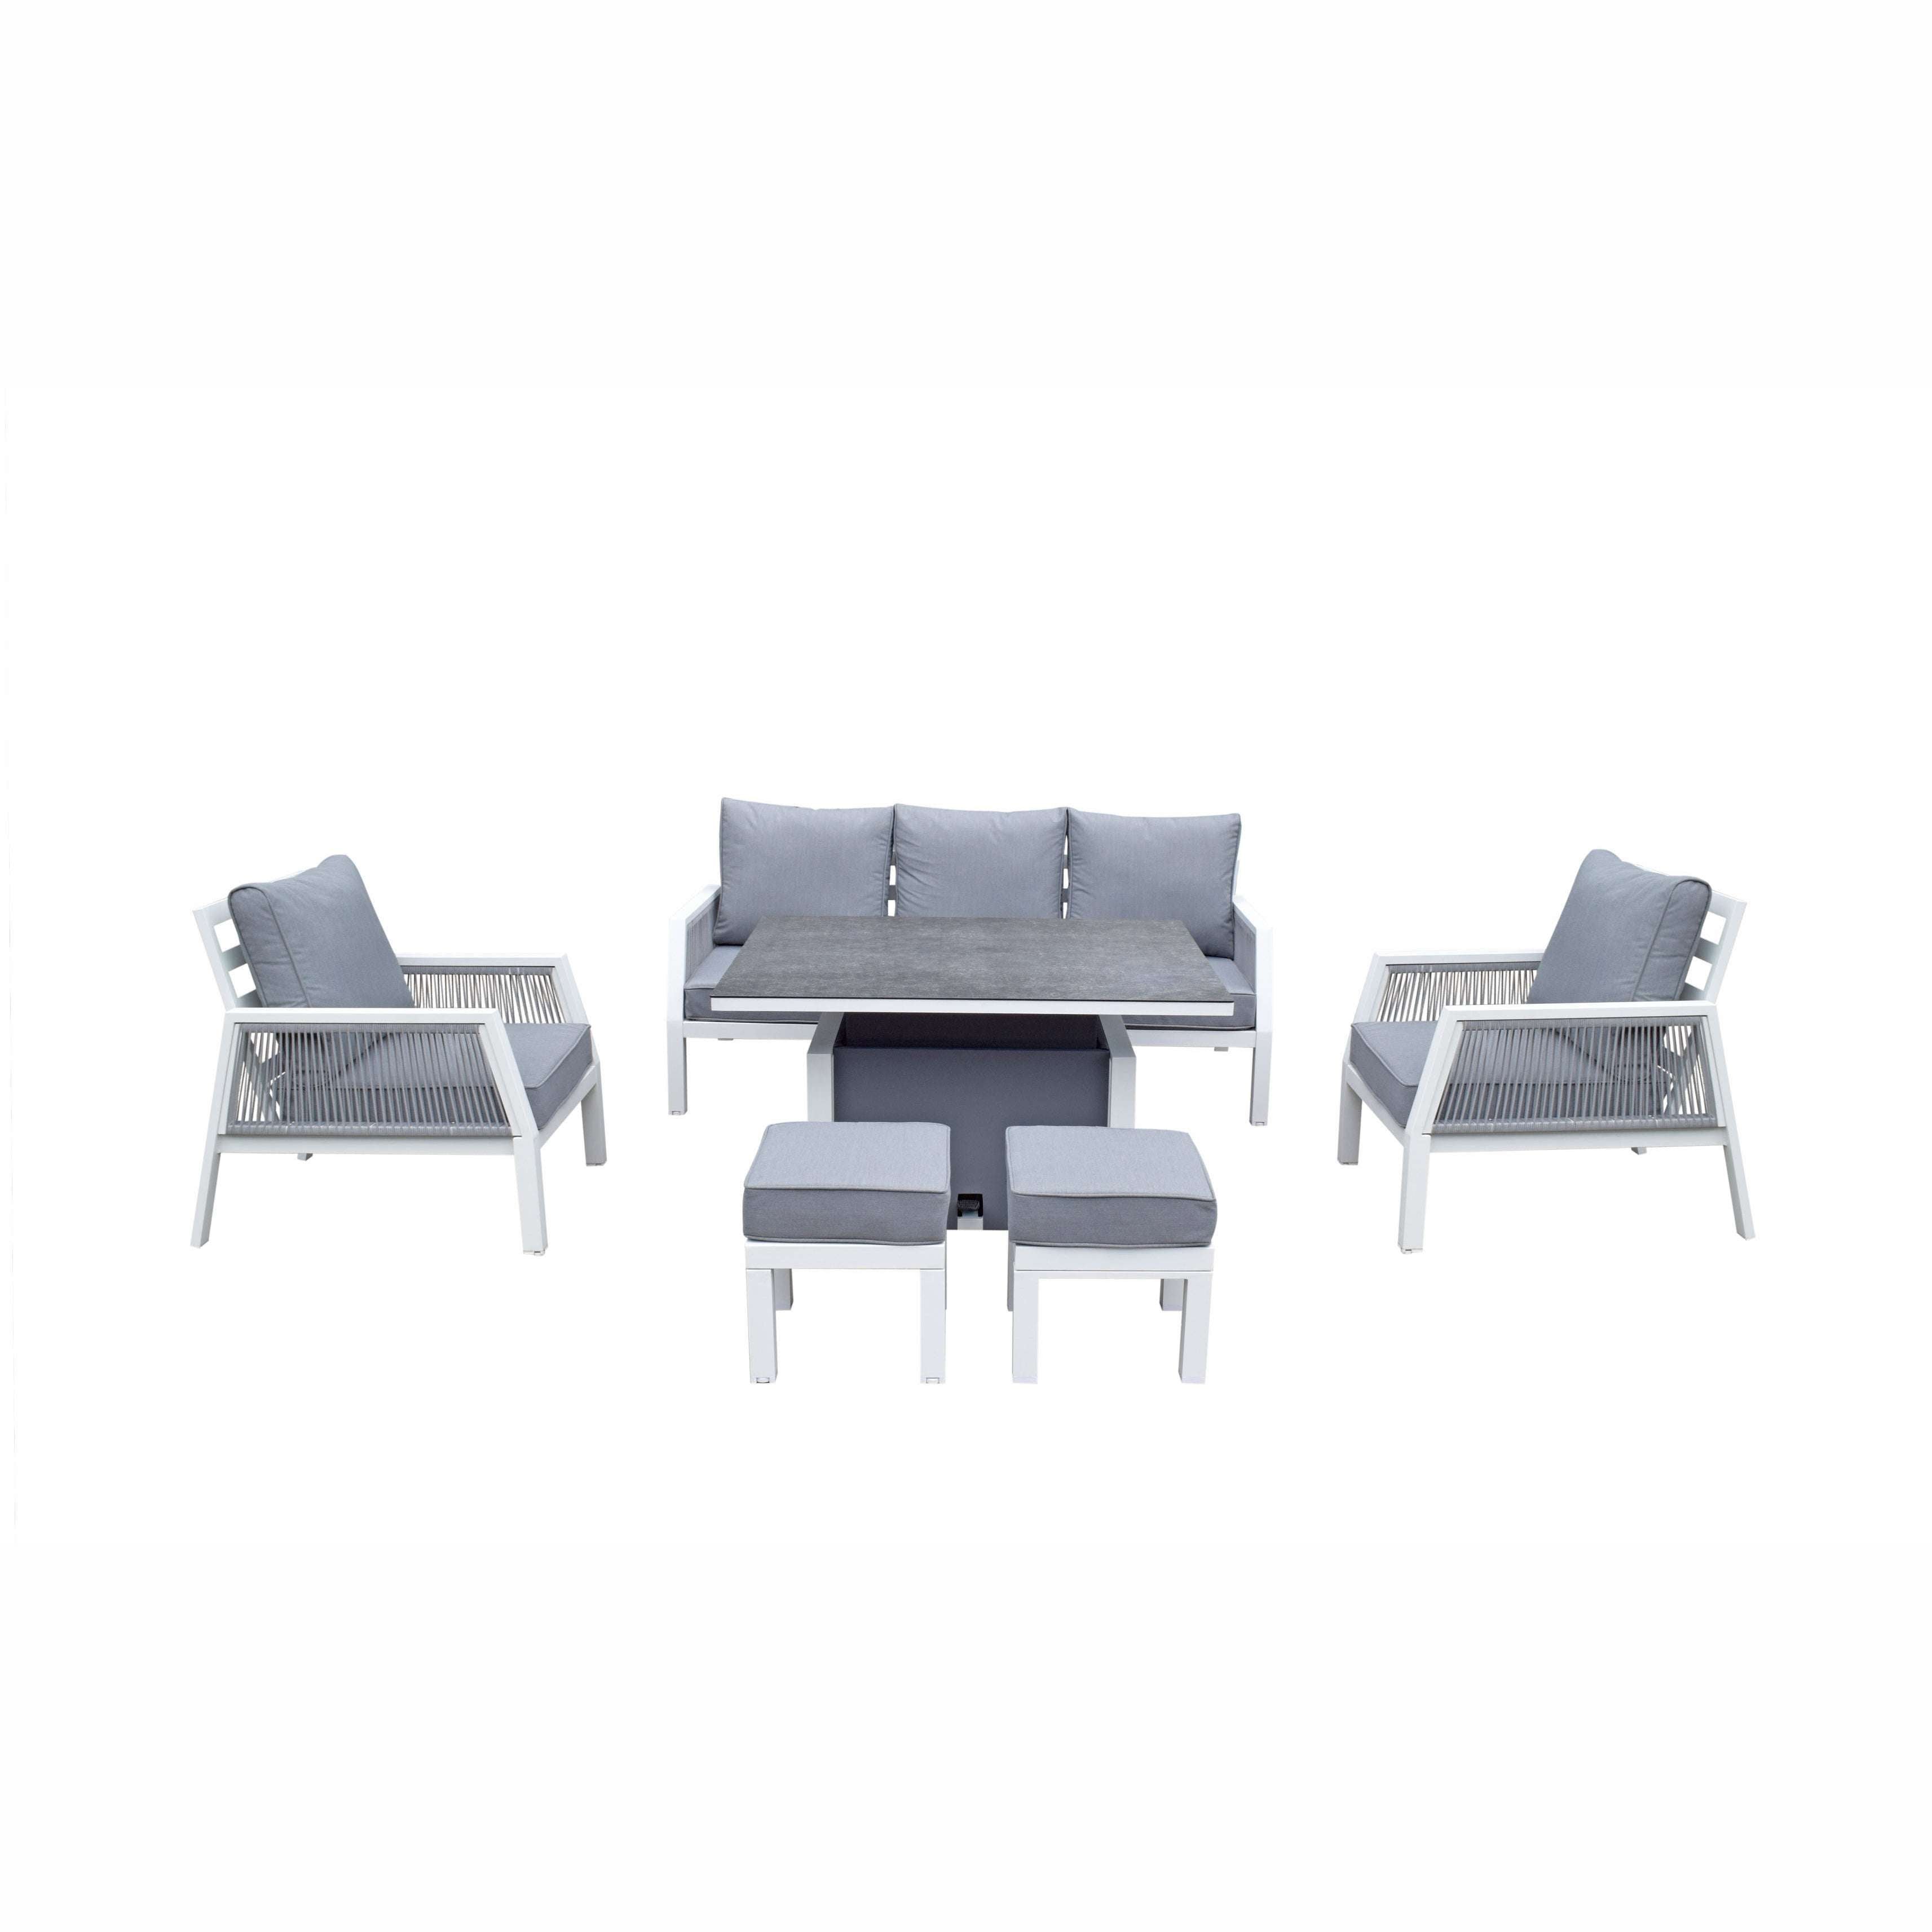 Exceptional Garden:Signature Weave Bettina 7-Seater Dining Set - Grey